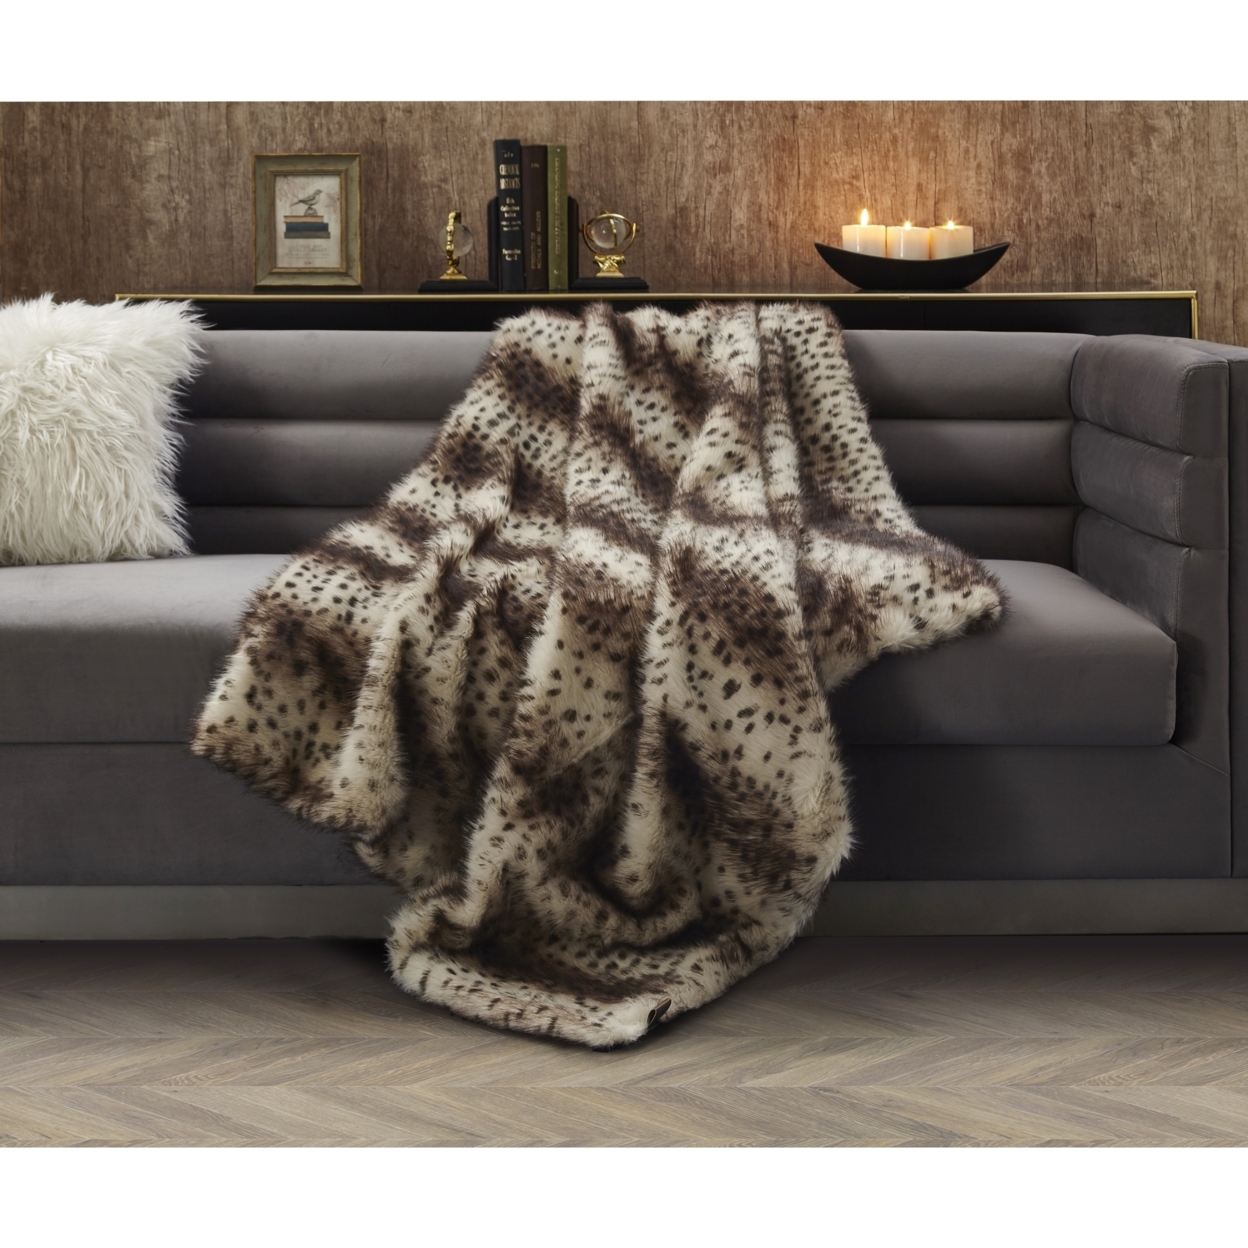 Avani Throw- Faux-Shaggy And Snuggly-Fluffy Cozy Texture - Brown Cheetah